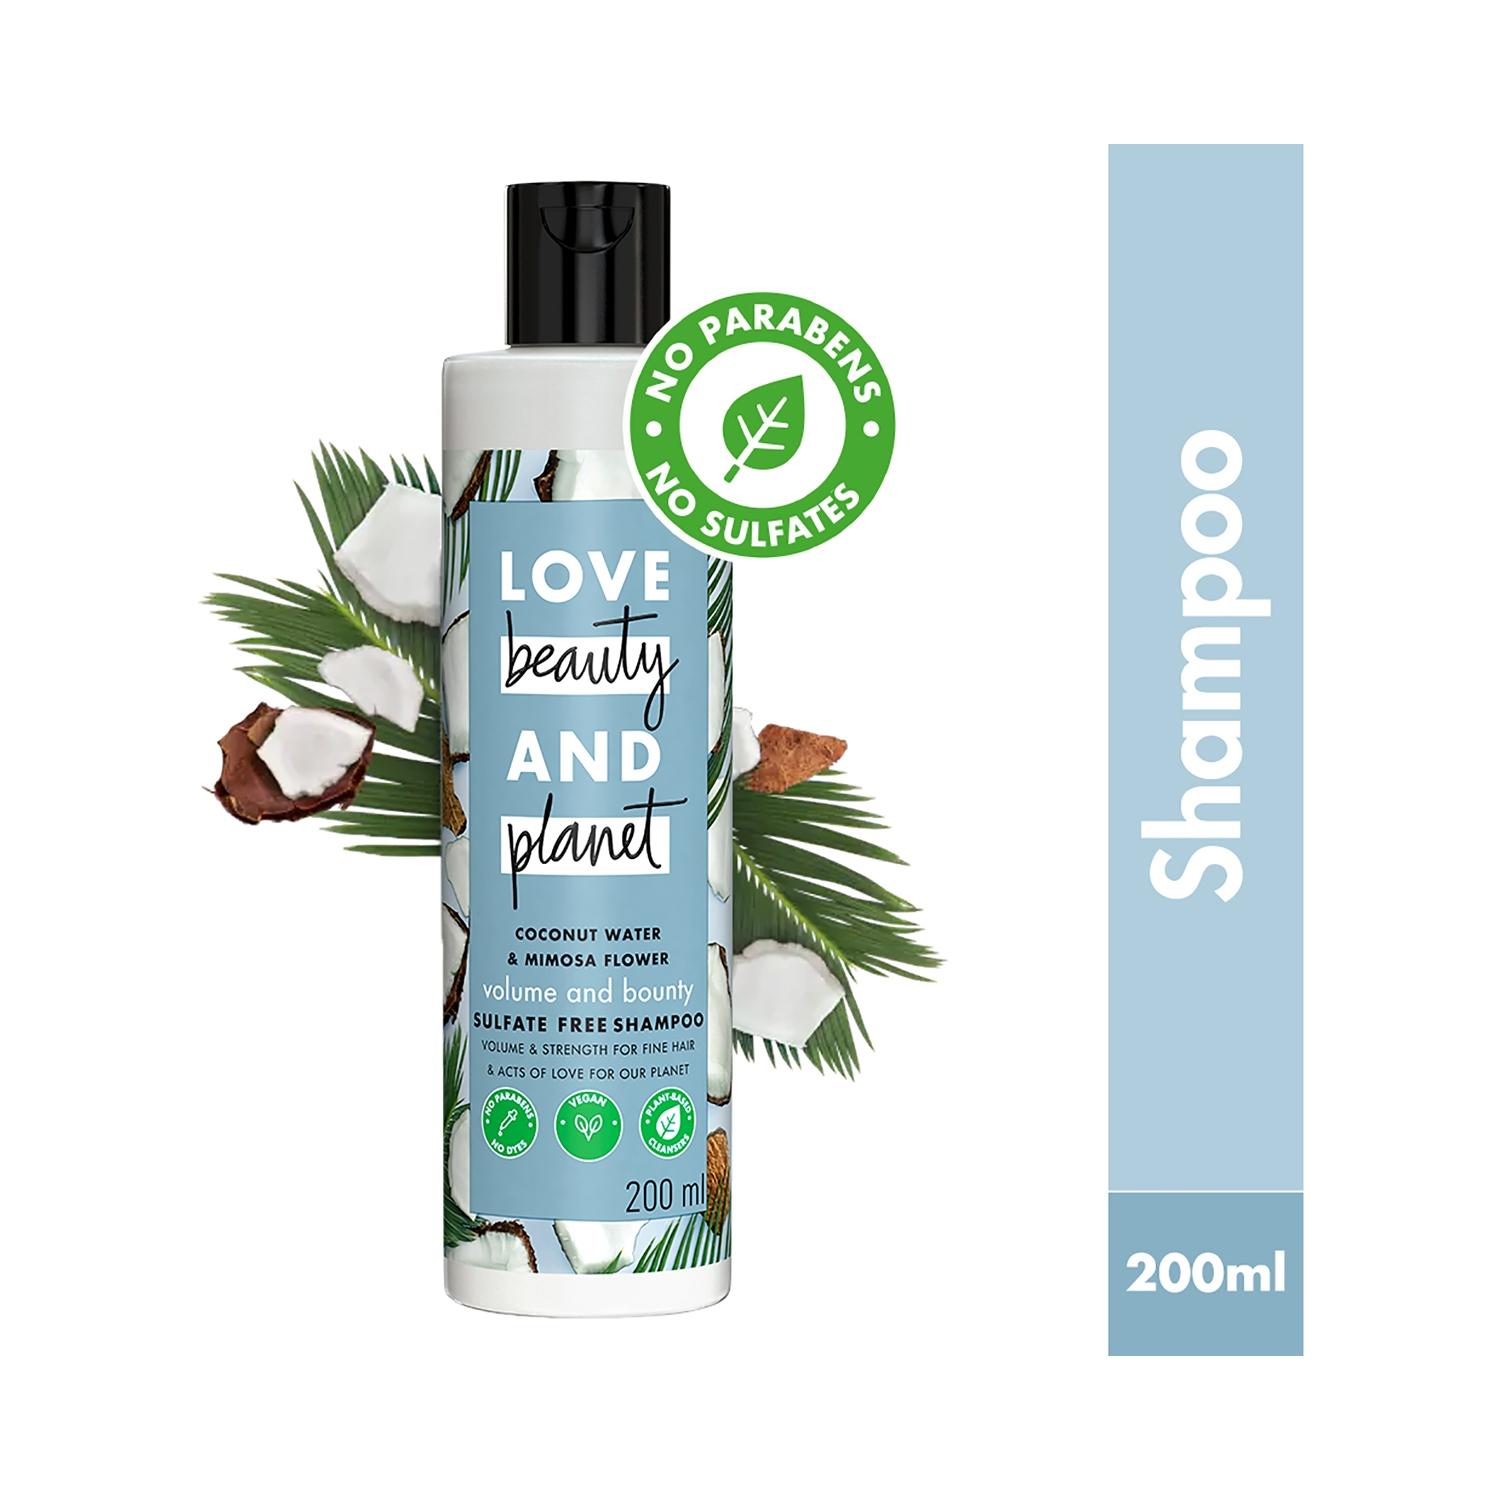 love beauty & planet coconut water and mimosa flower volume and bounty shampoo (200ml)